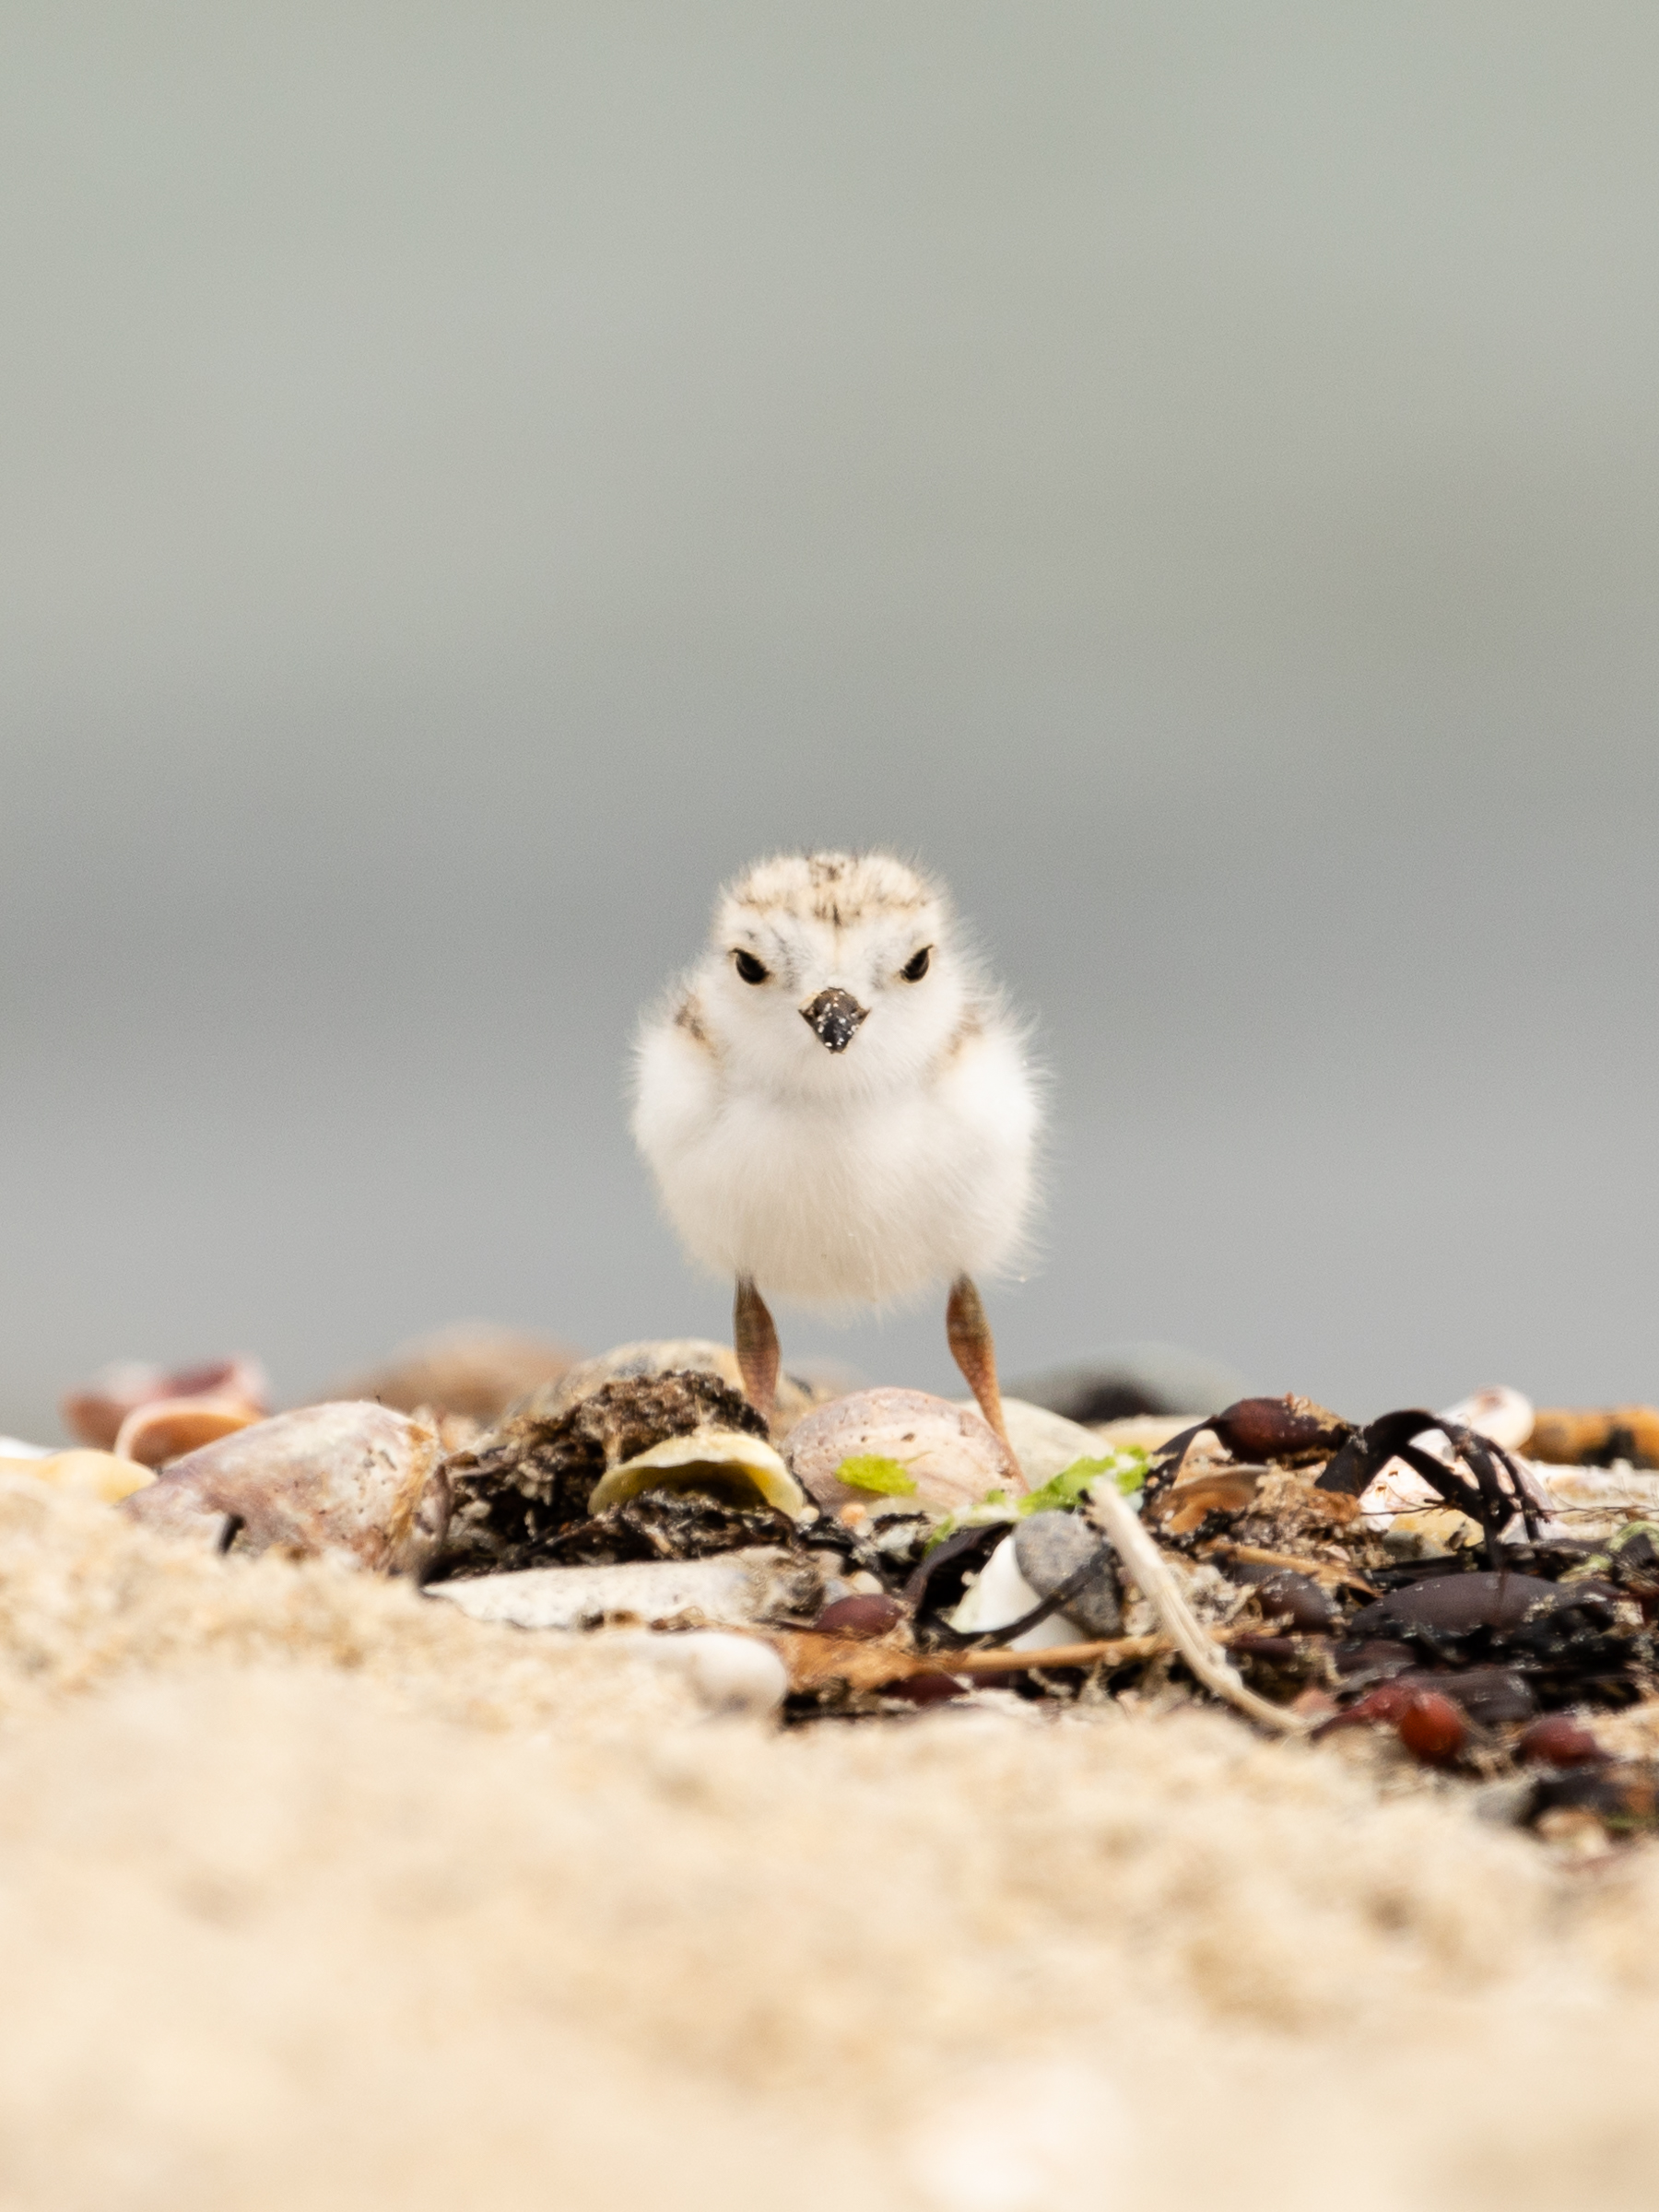 Piping plover chick looking directly at camera with blurred ocean in background